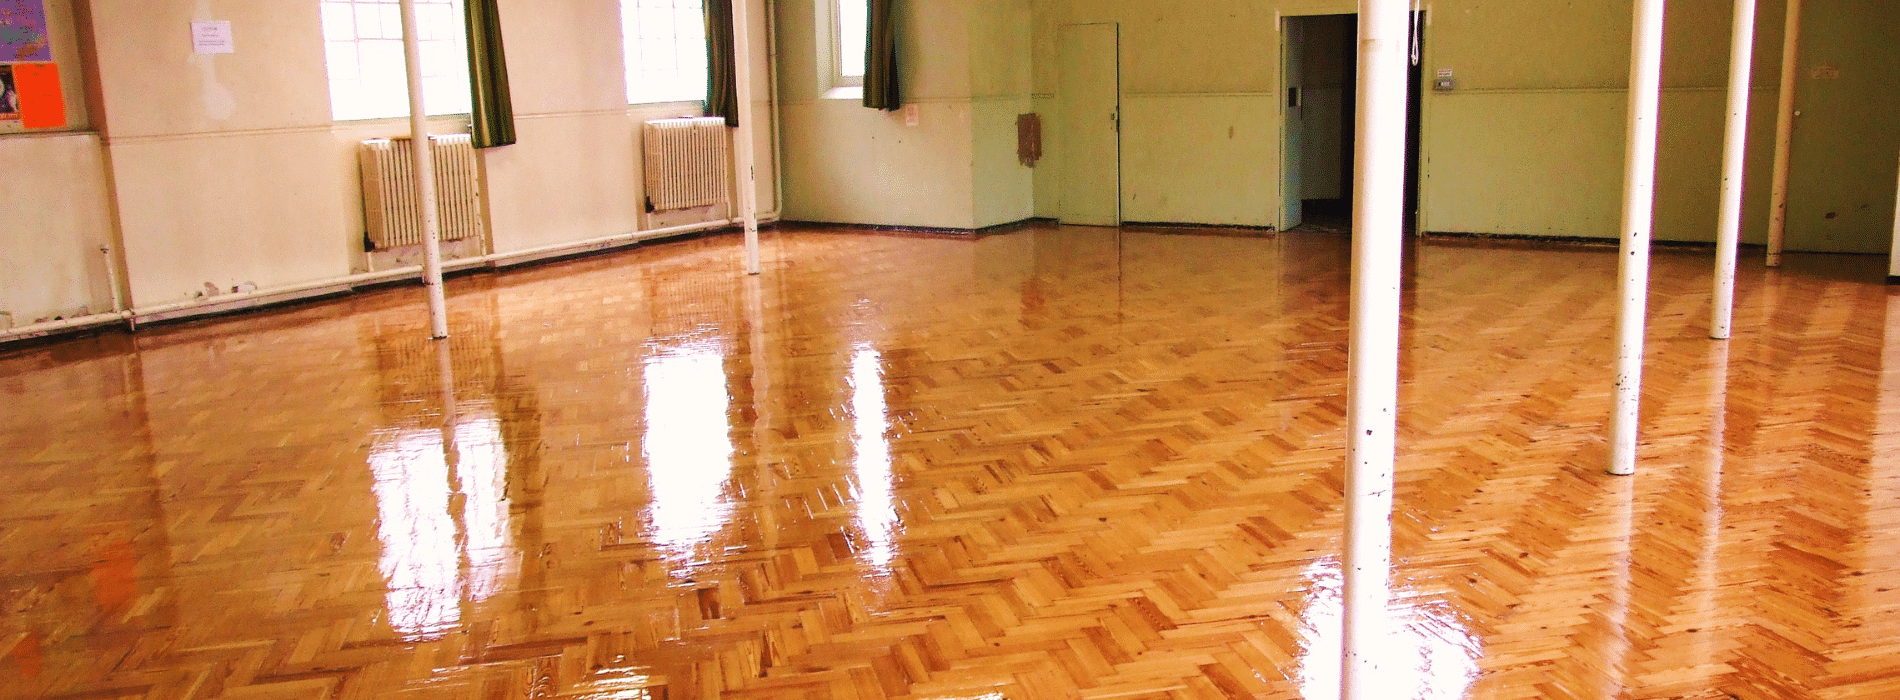 Expertly restored 5-year-old hardwood floor in Brompton, SW3. Mr Sander® used Bona 2.5K Frost whitewashing and Traffic HD 16% sheen matte lacquer. Durable and stunning, this finish guarantees long-lasting beauty. 